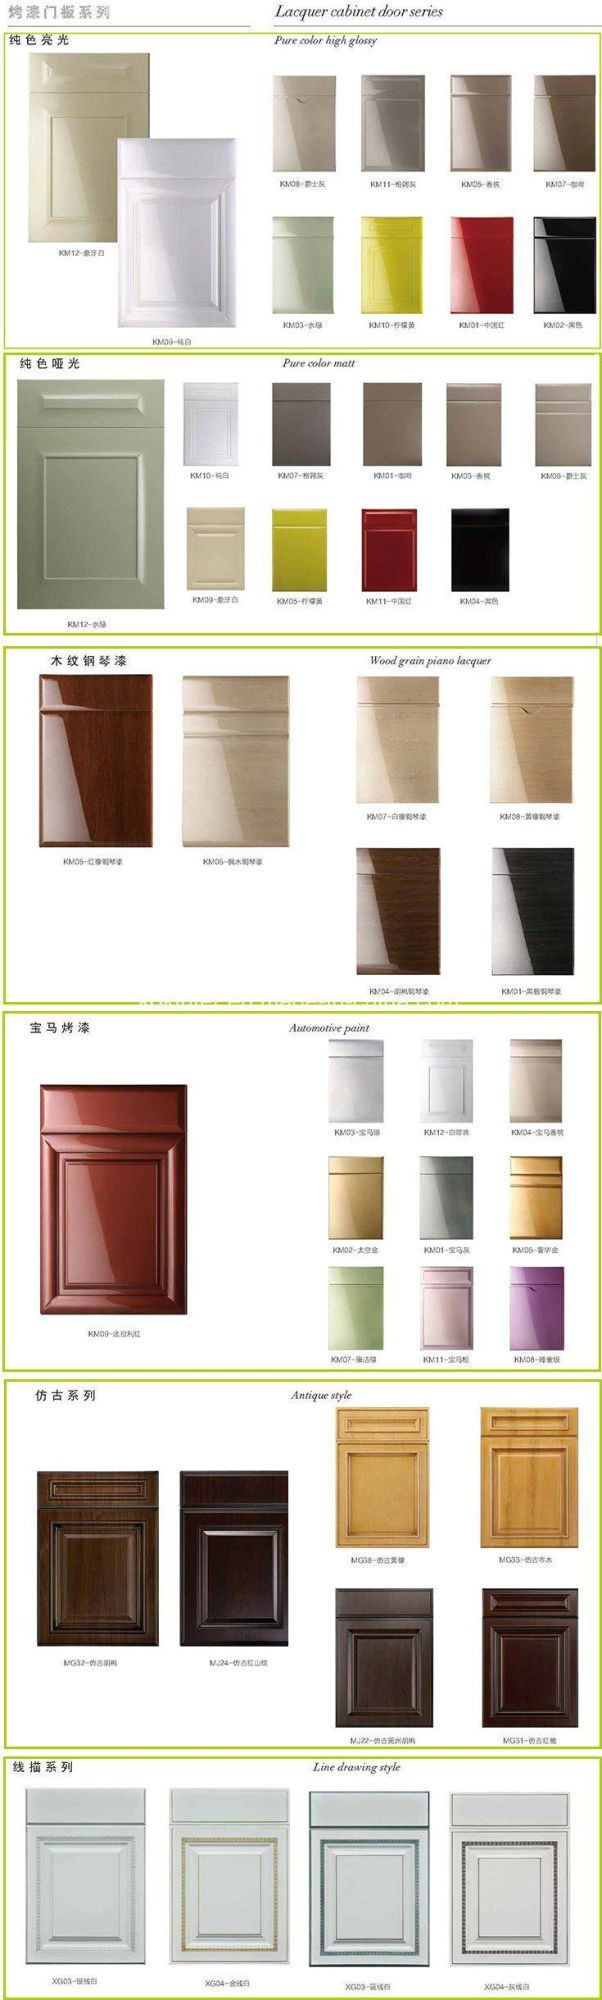 MDF/MFC/Plywood Particle Board European Kitchen Cabinets of Kok014